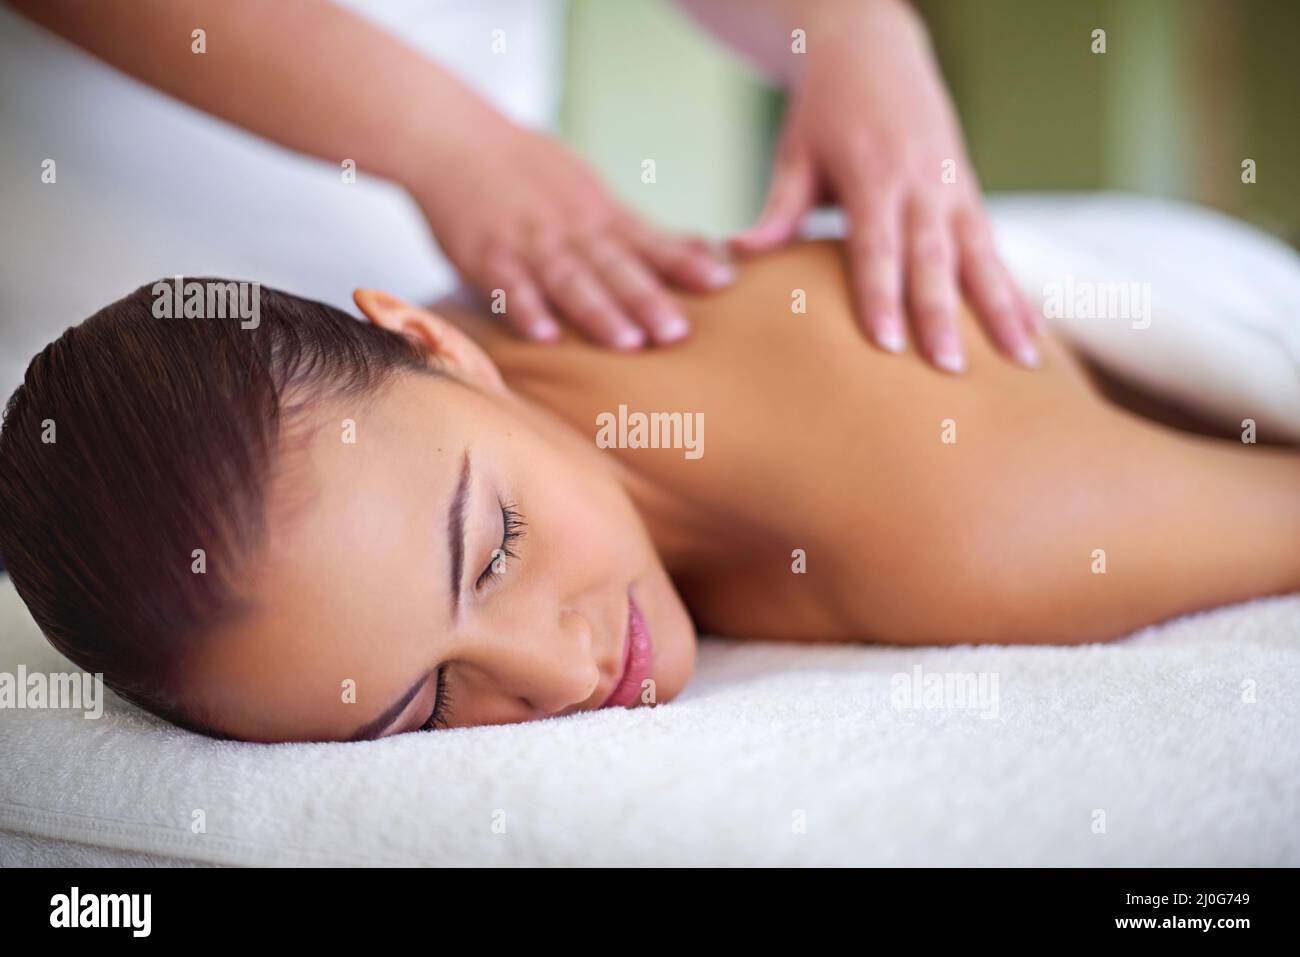 Letting her worries drift away. Shot of a young woman enjoying a back massage at a spa. Stock Photo